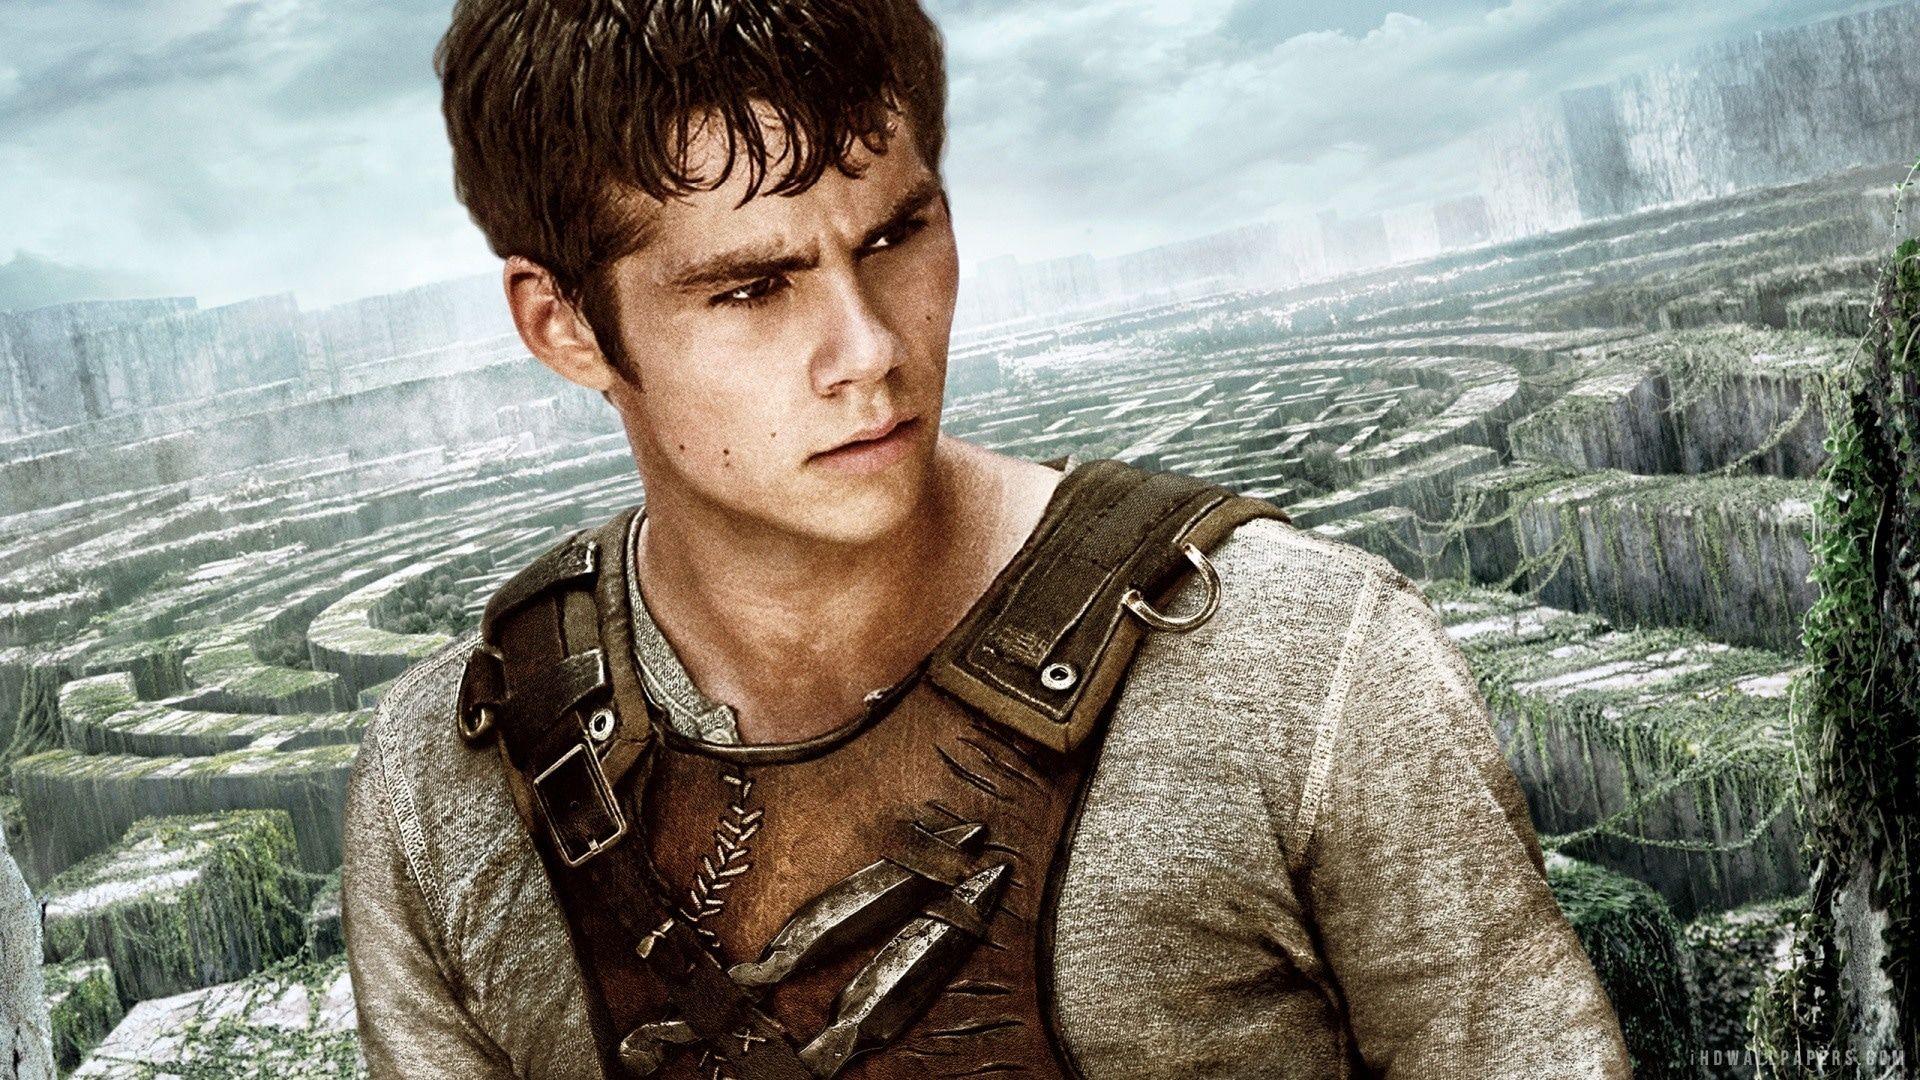 The Maze Runner: The Death Cure to resume production February 2017